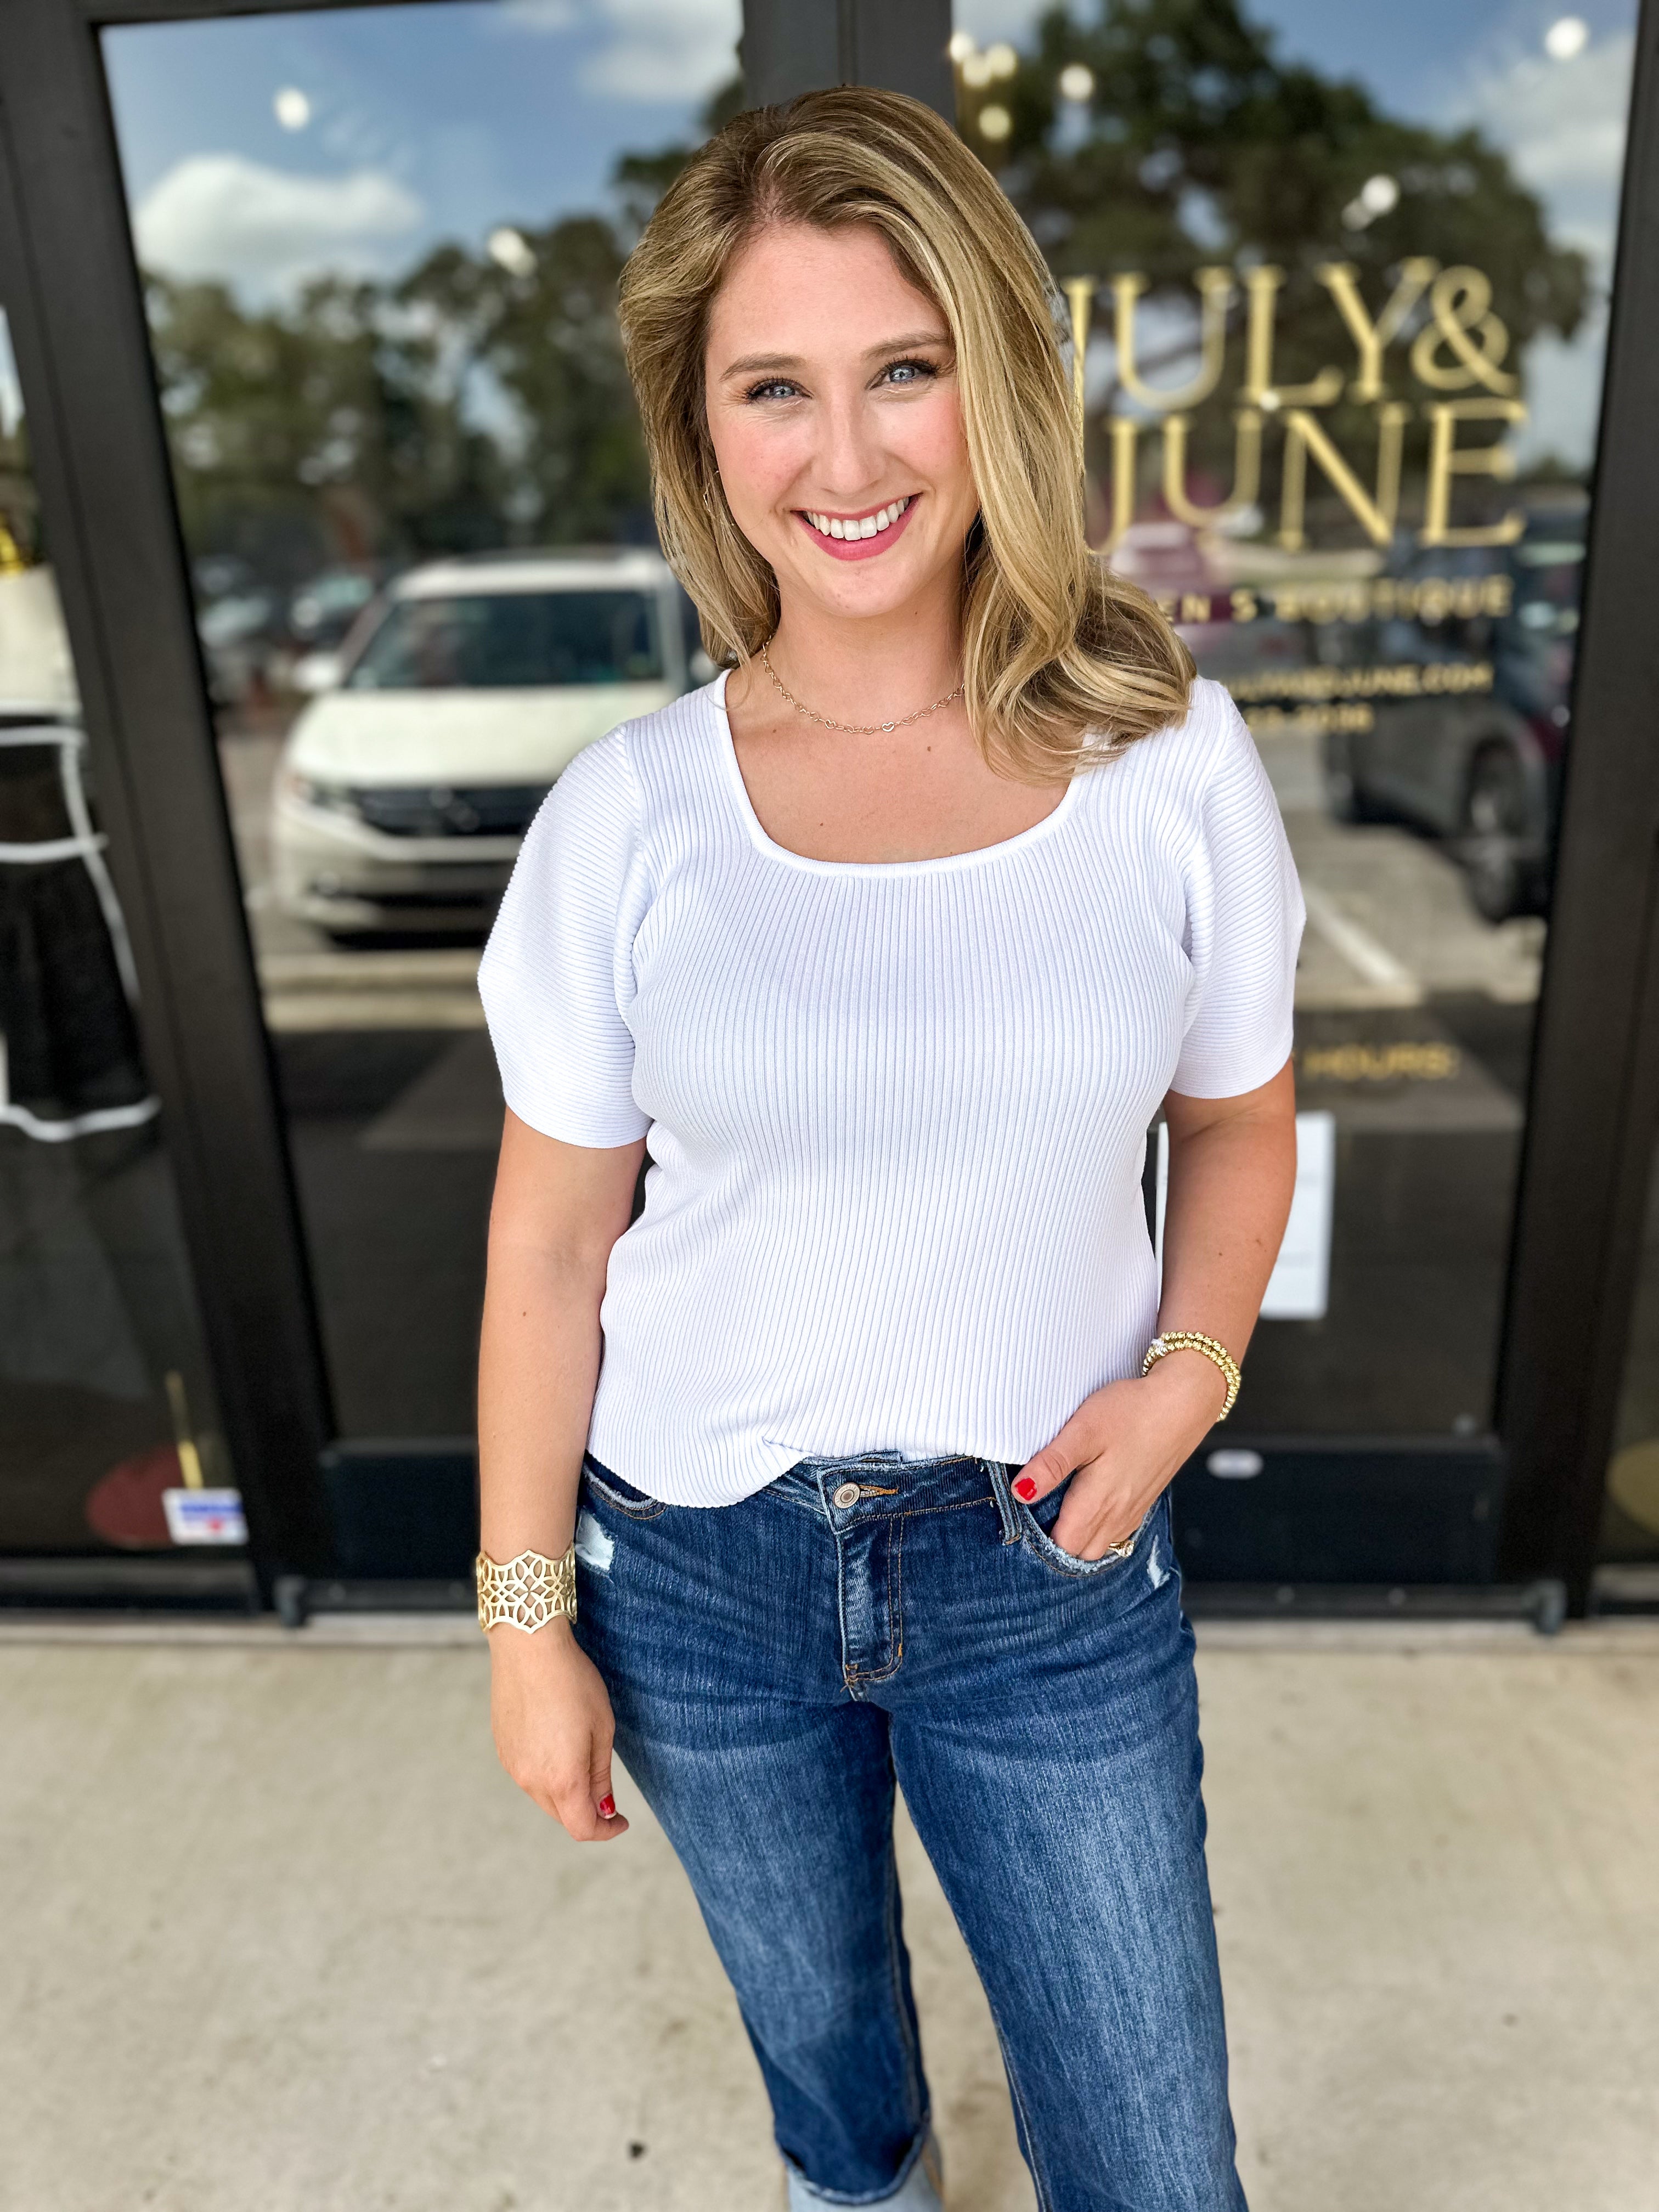 Ribbed Square Neck Top - Ivory-200 Fashion Blouses-JODIFL-July & June Women's Fashion Boutique Located in San Antonio, Texas